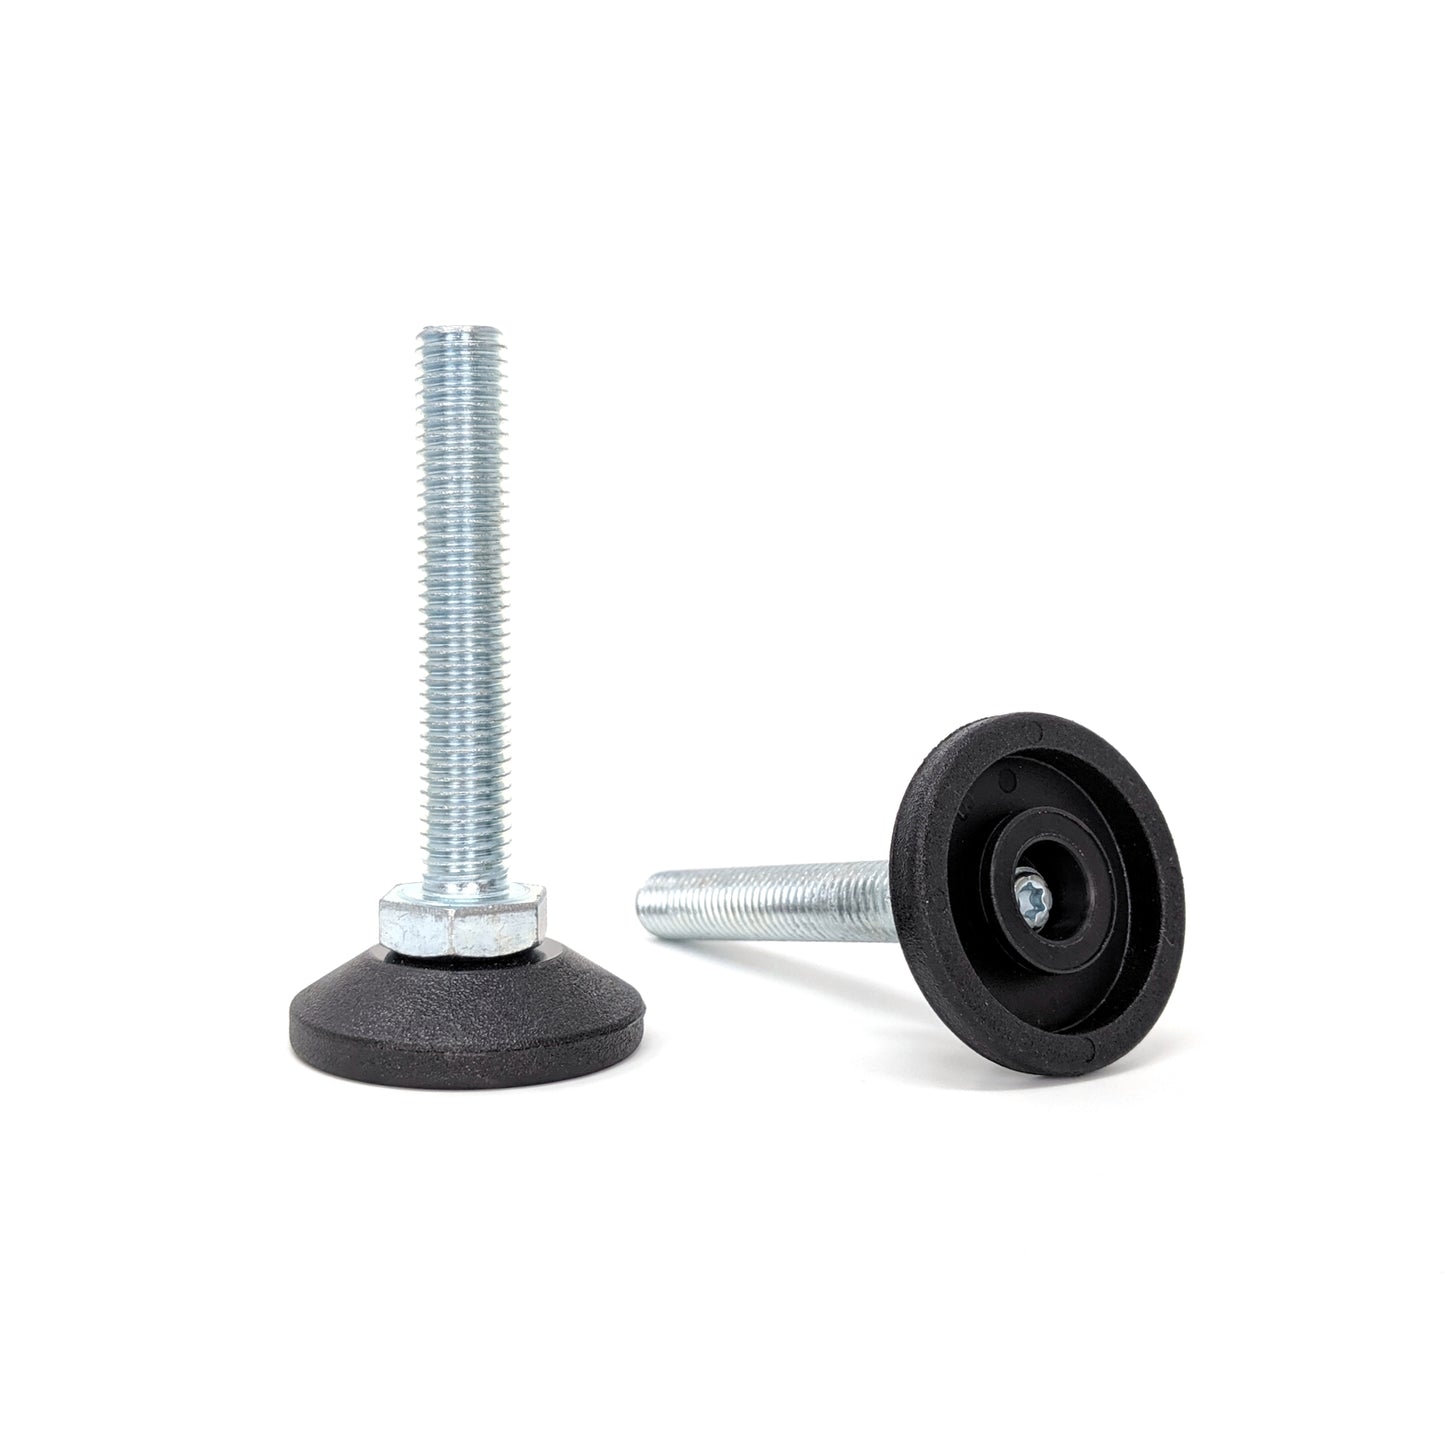 Adjustable Feet, 38mm Dia. Base, M10 60mm Thread, 550kg Static Load Capacity - Made In Germany - Keay Vital Parts